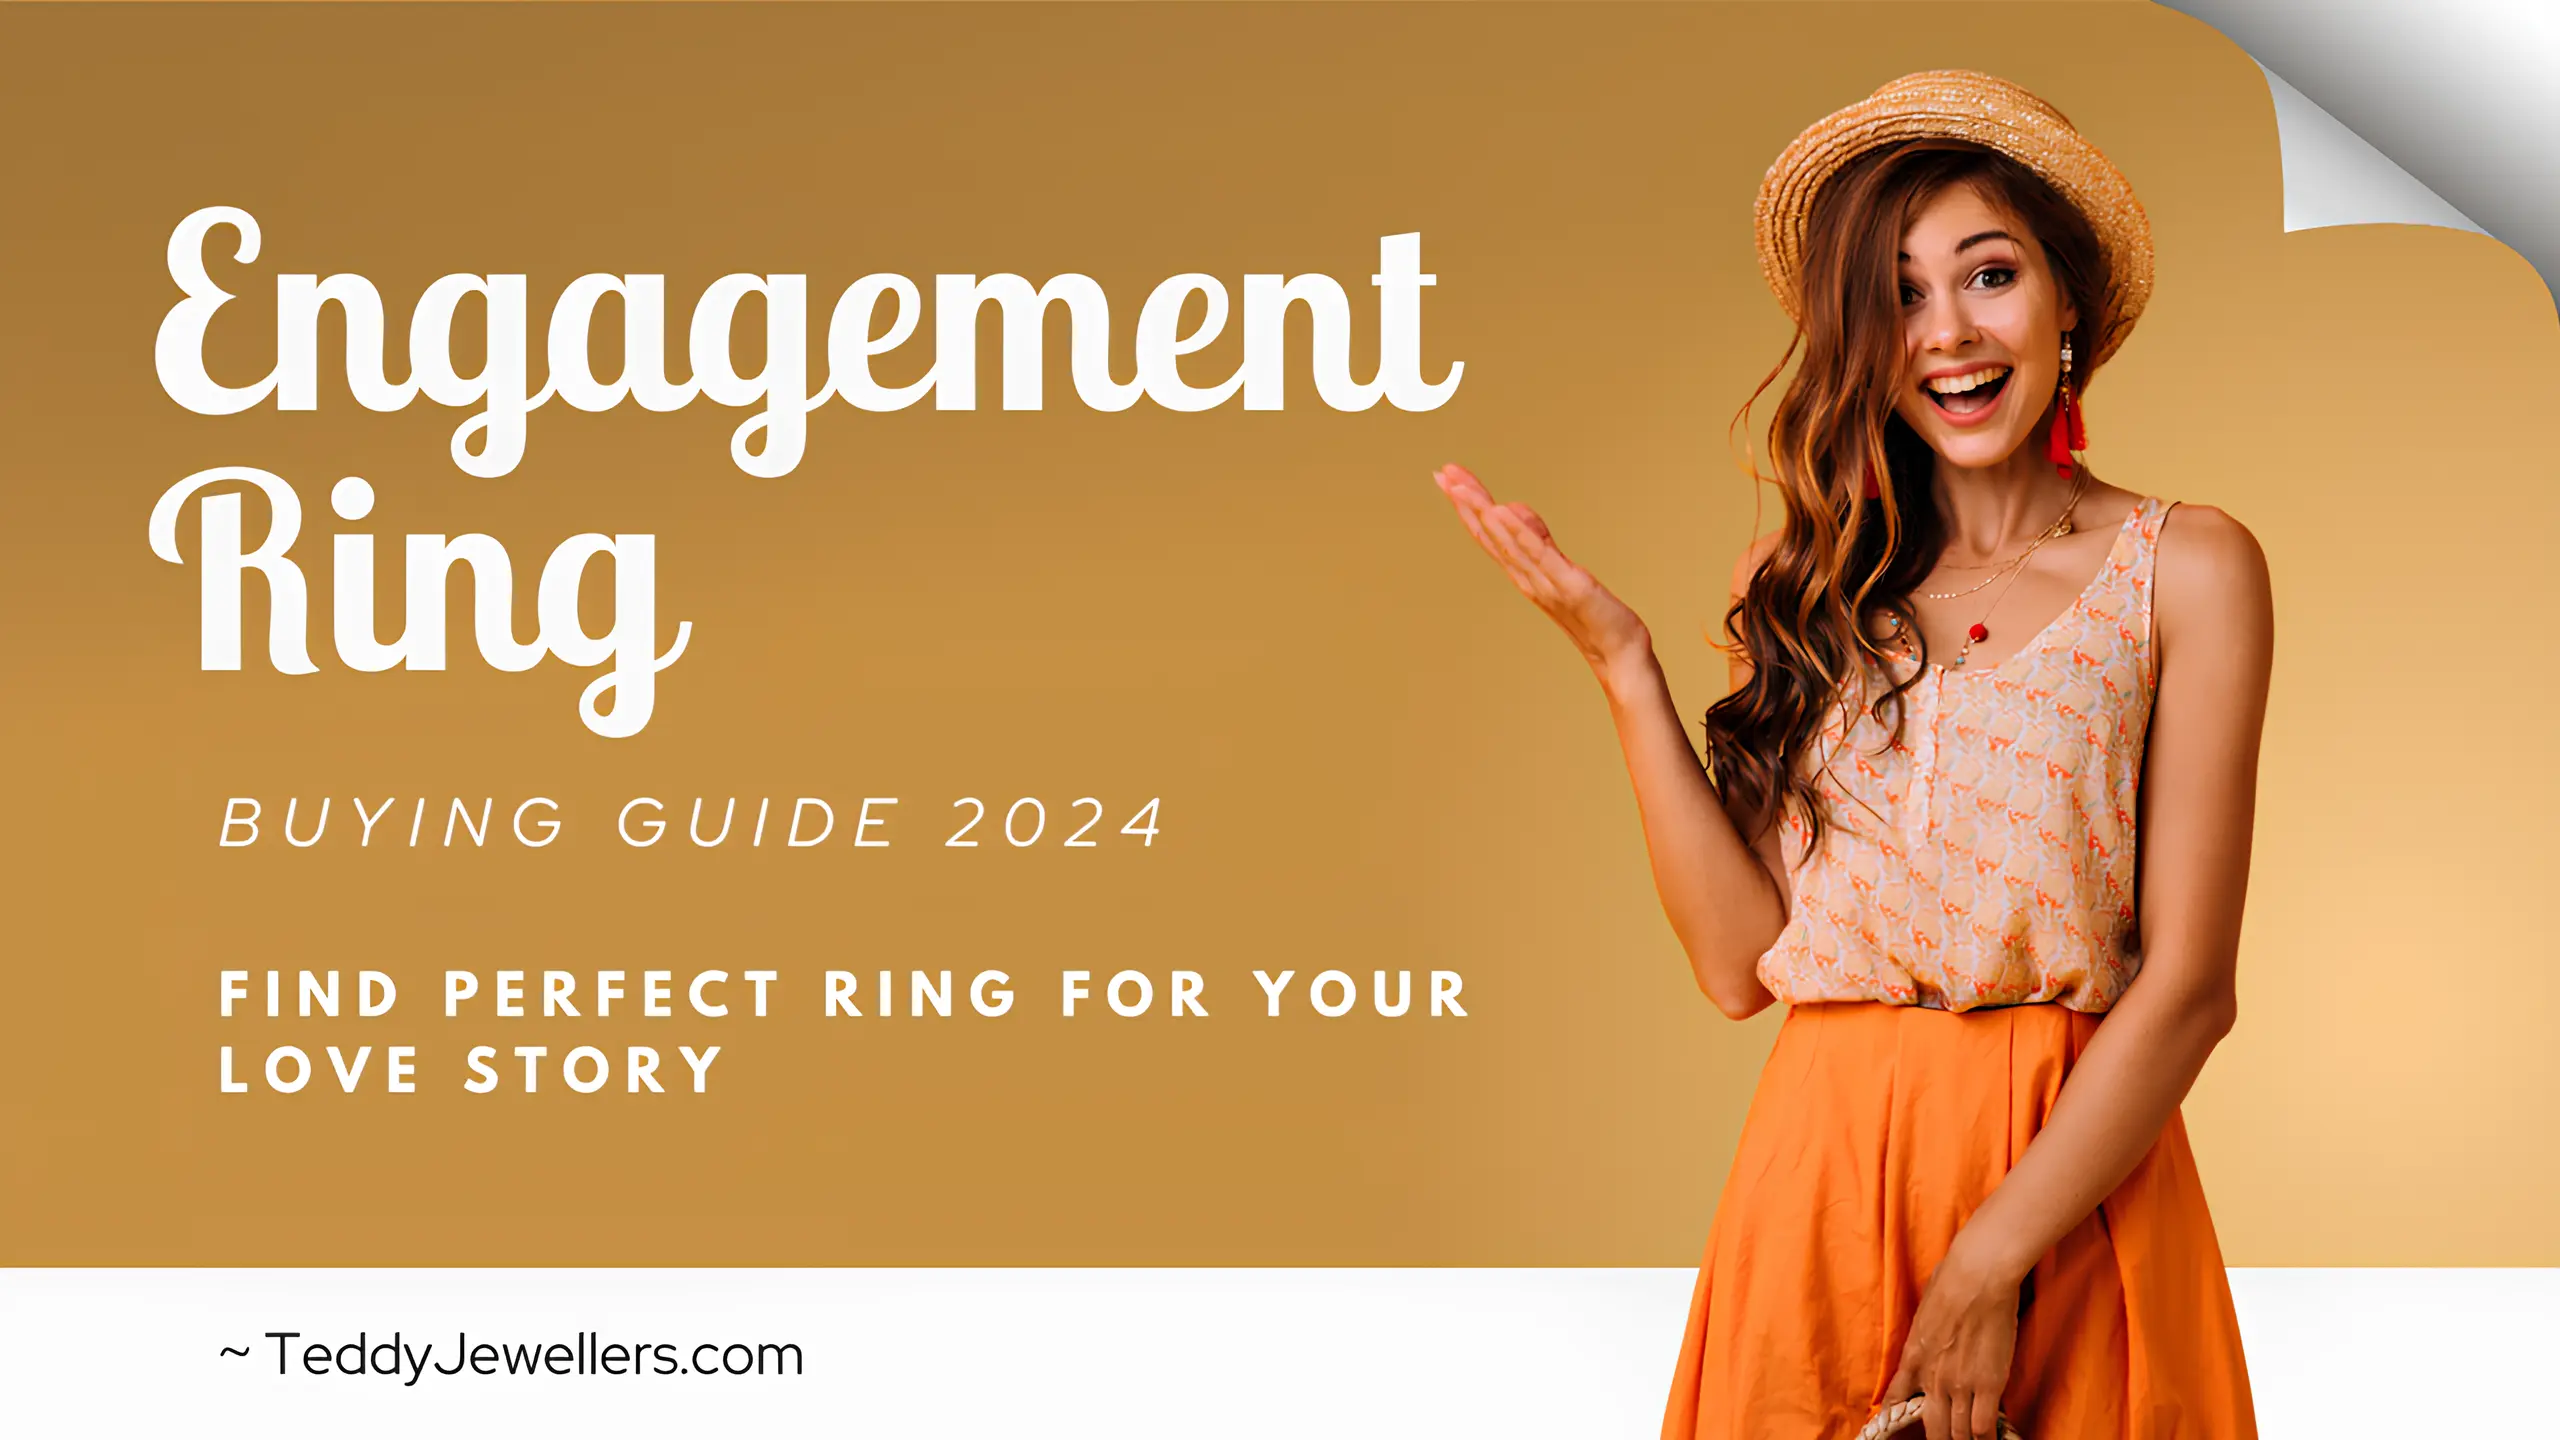 Engagement Ring Buying Guide 2024 - Teddy Jewellers